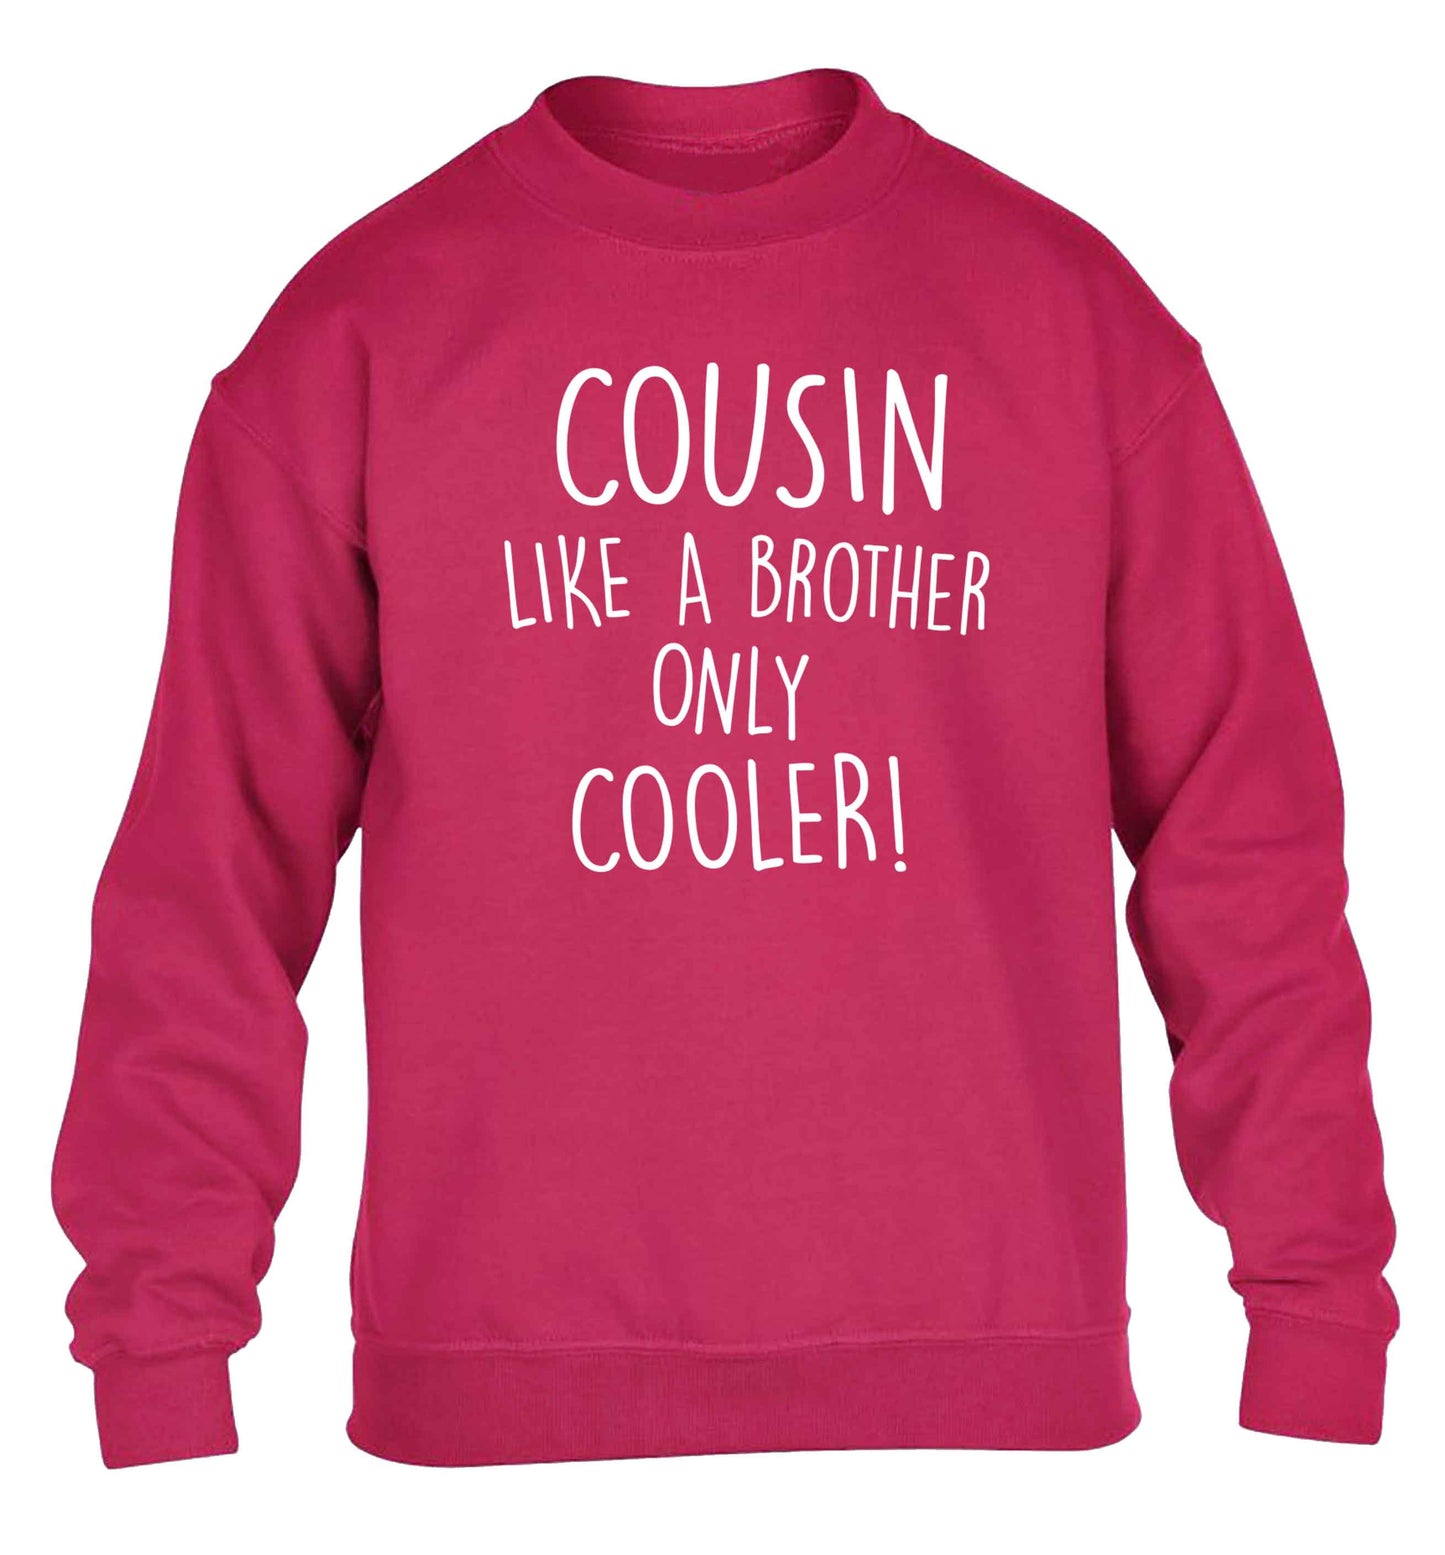 Cousin like a brother only cooler children's pink sweater 12-13 Years